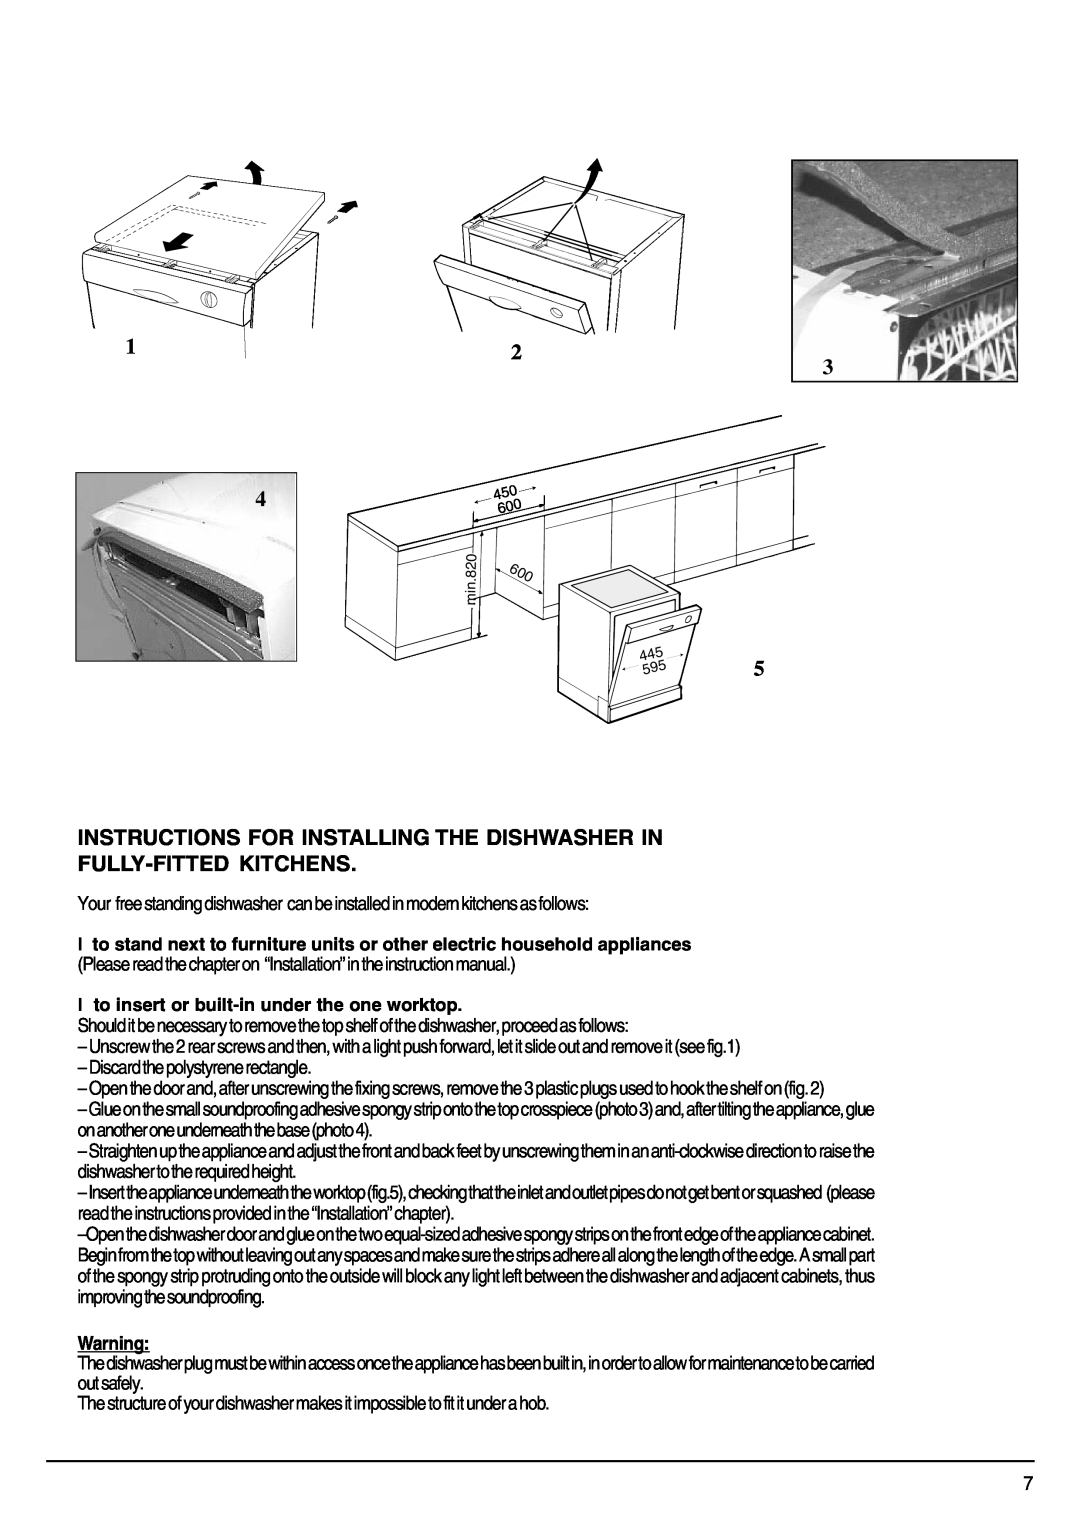 Indesit SDW85, SDW80 manual Instructions For Installing The Dishwasher In, Fully-Fittedkitchens 